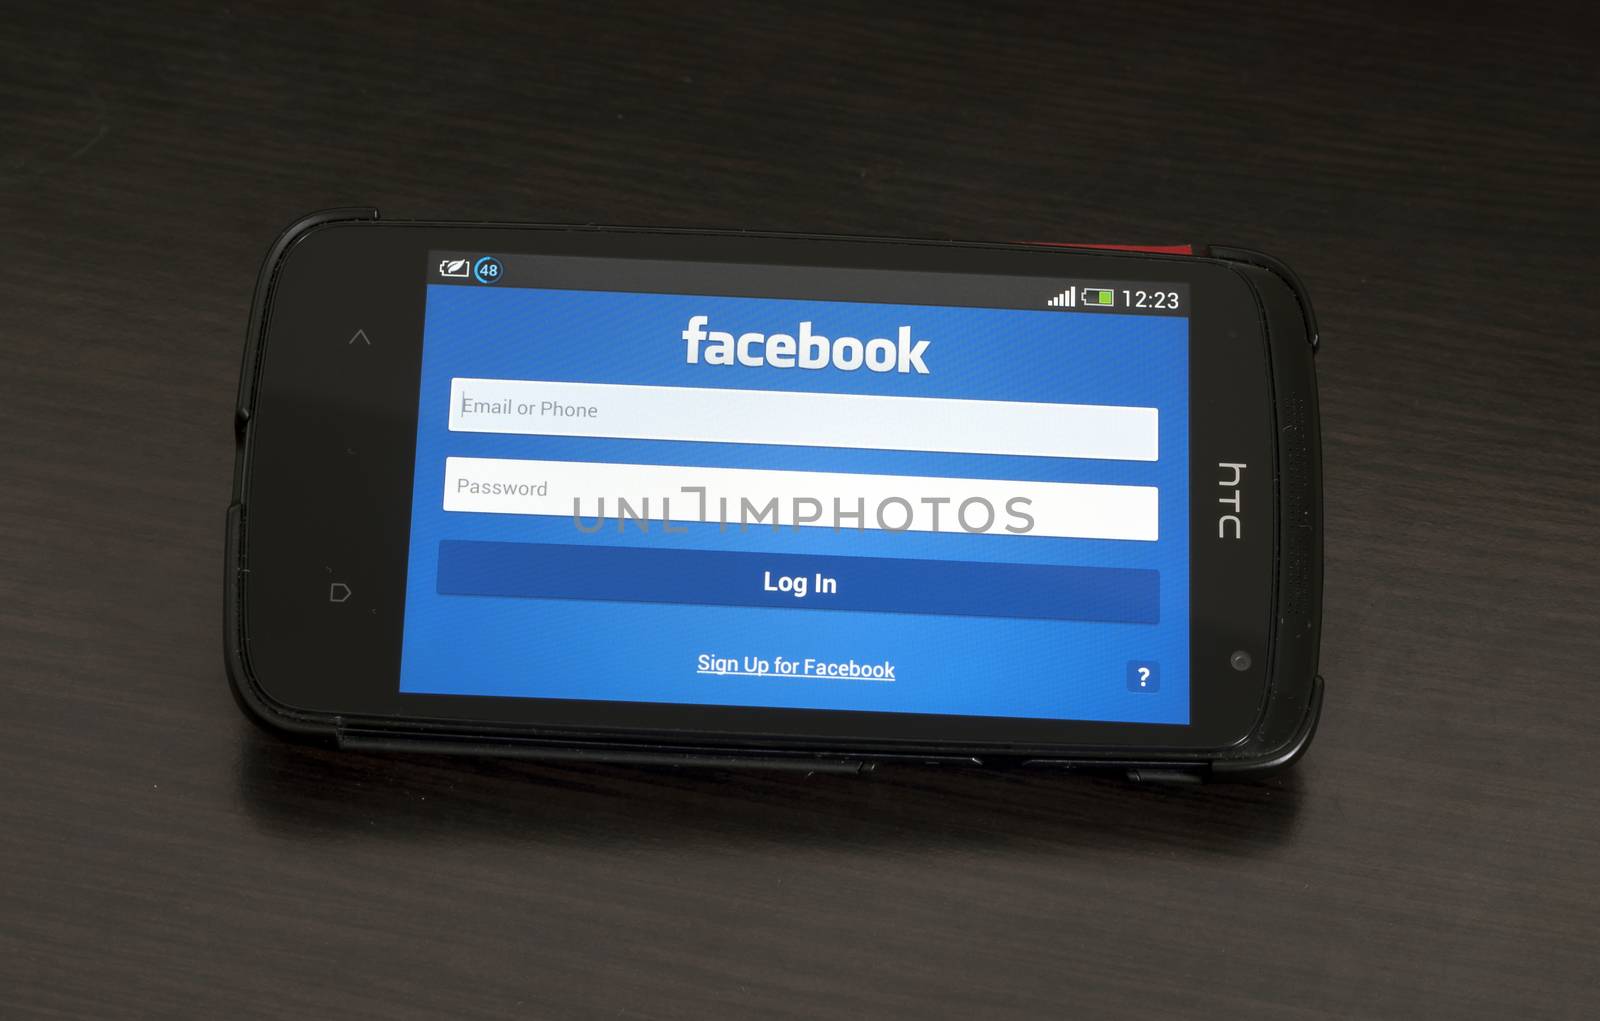 Photo of a HTC Desire device, showing the Facebook log in formul by maxmitzu